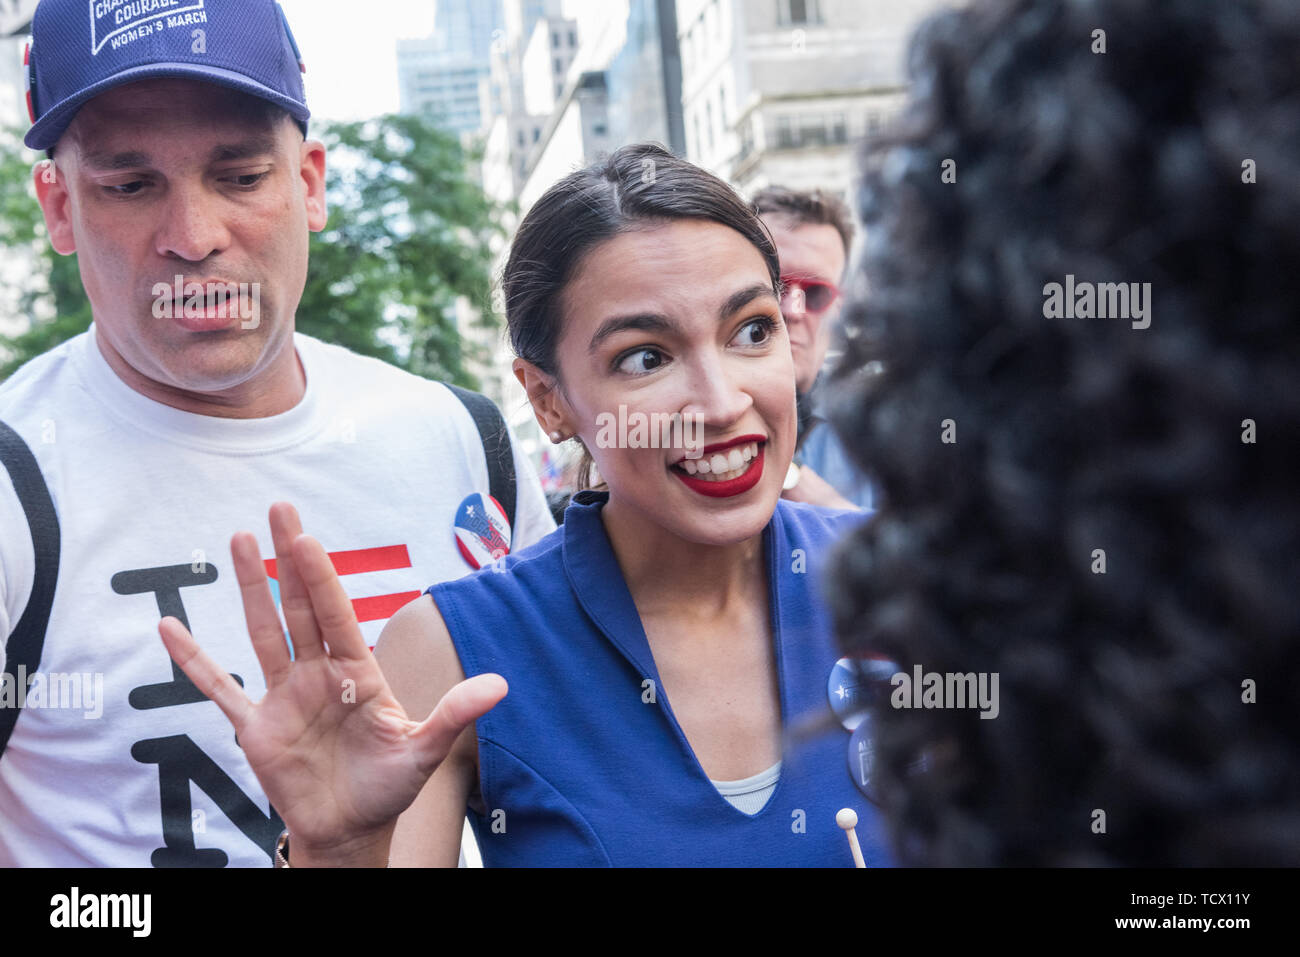 New York, USA. 09th June, 2019. Congresswoman Alexandria Ocasio-Cortez - On June 9, 2019, millions of people lined the streets along 5th Avenue in Midtown Manhattan celebrating their Puerto Rican heritage. In its 62nd year, the National Puerto Rican Day Parade is the largest parade of Puerto Rican culture. This year's theme was 'Un Pueblo, Muchas Voces' (One Nation, Many Voices) celebrating the diversity of Puerto Rico. Credit: Gabriele Holtermann-Gorden/Pacific Press/Alamy Live News Stock Photo